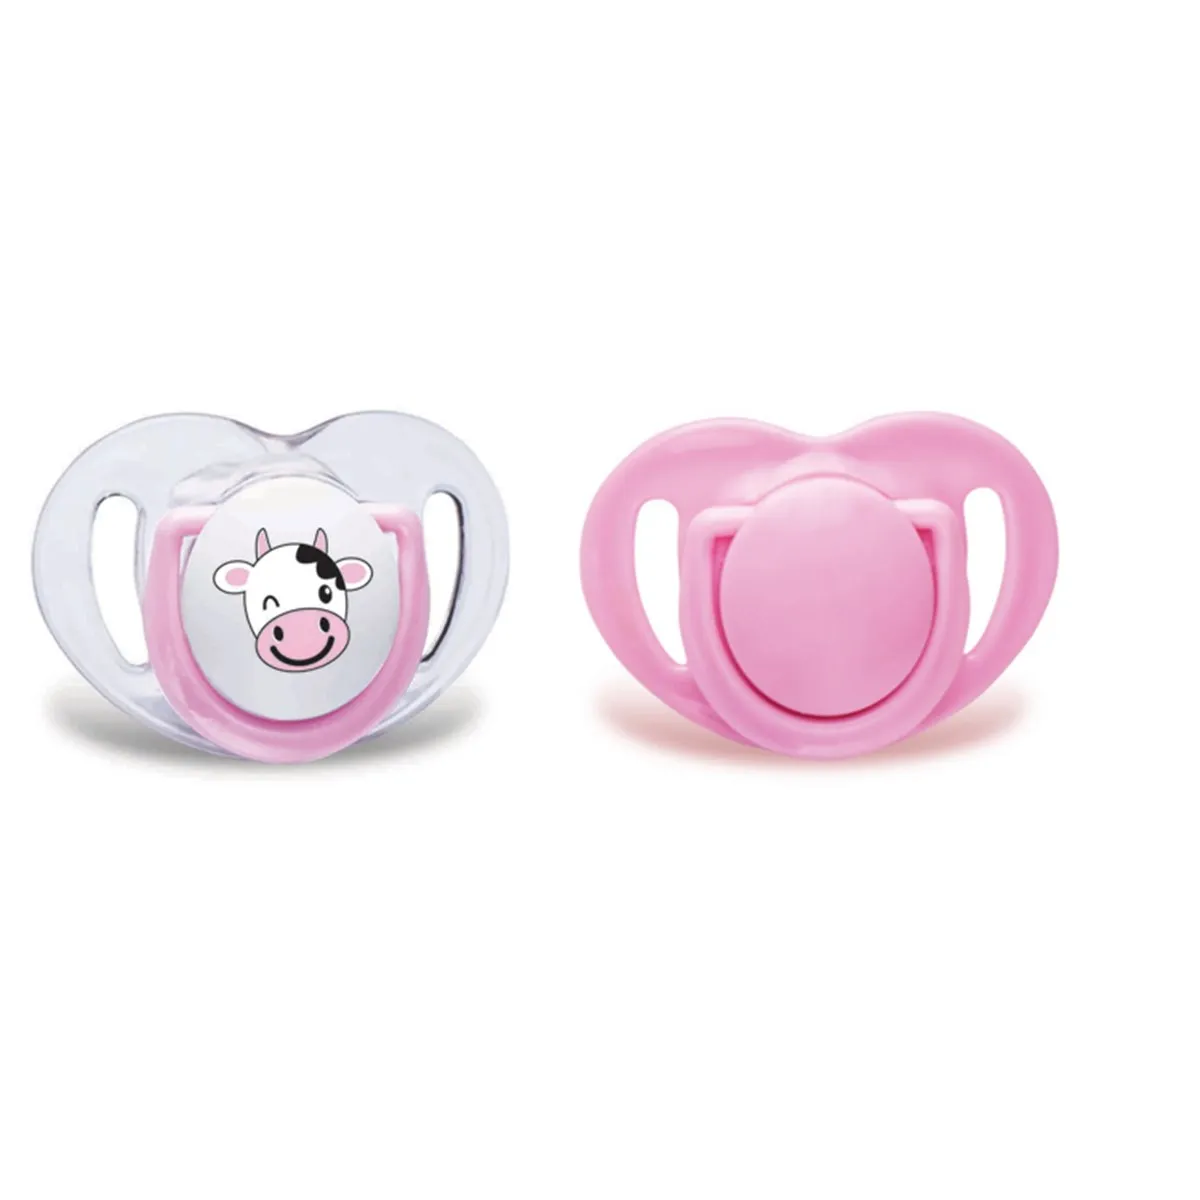 Mamajoo silicone orthodontic double pacifier pink cow/0 months